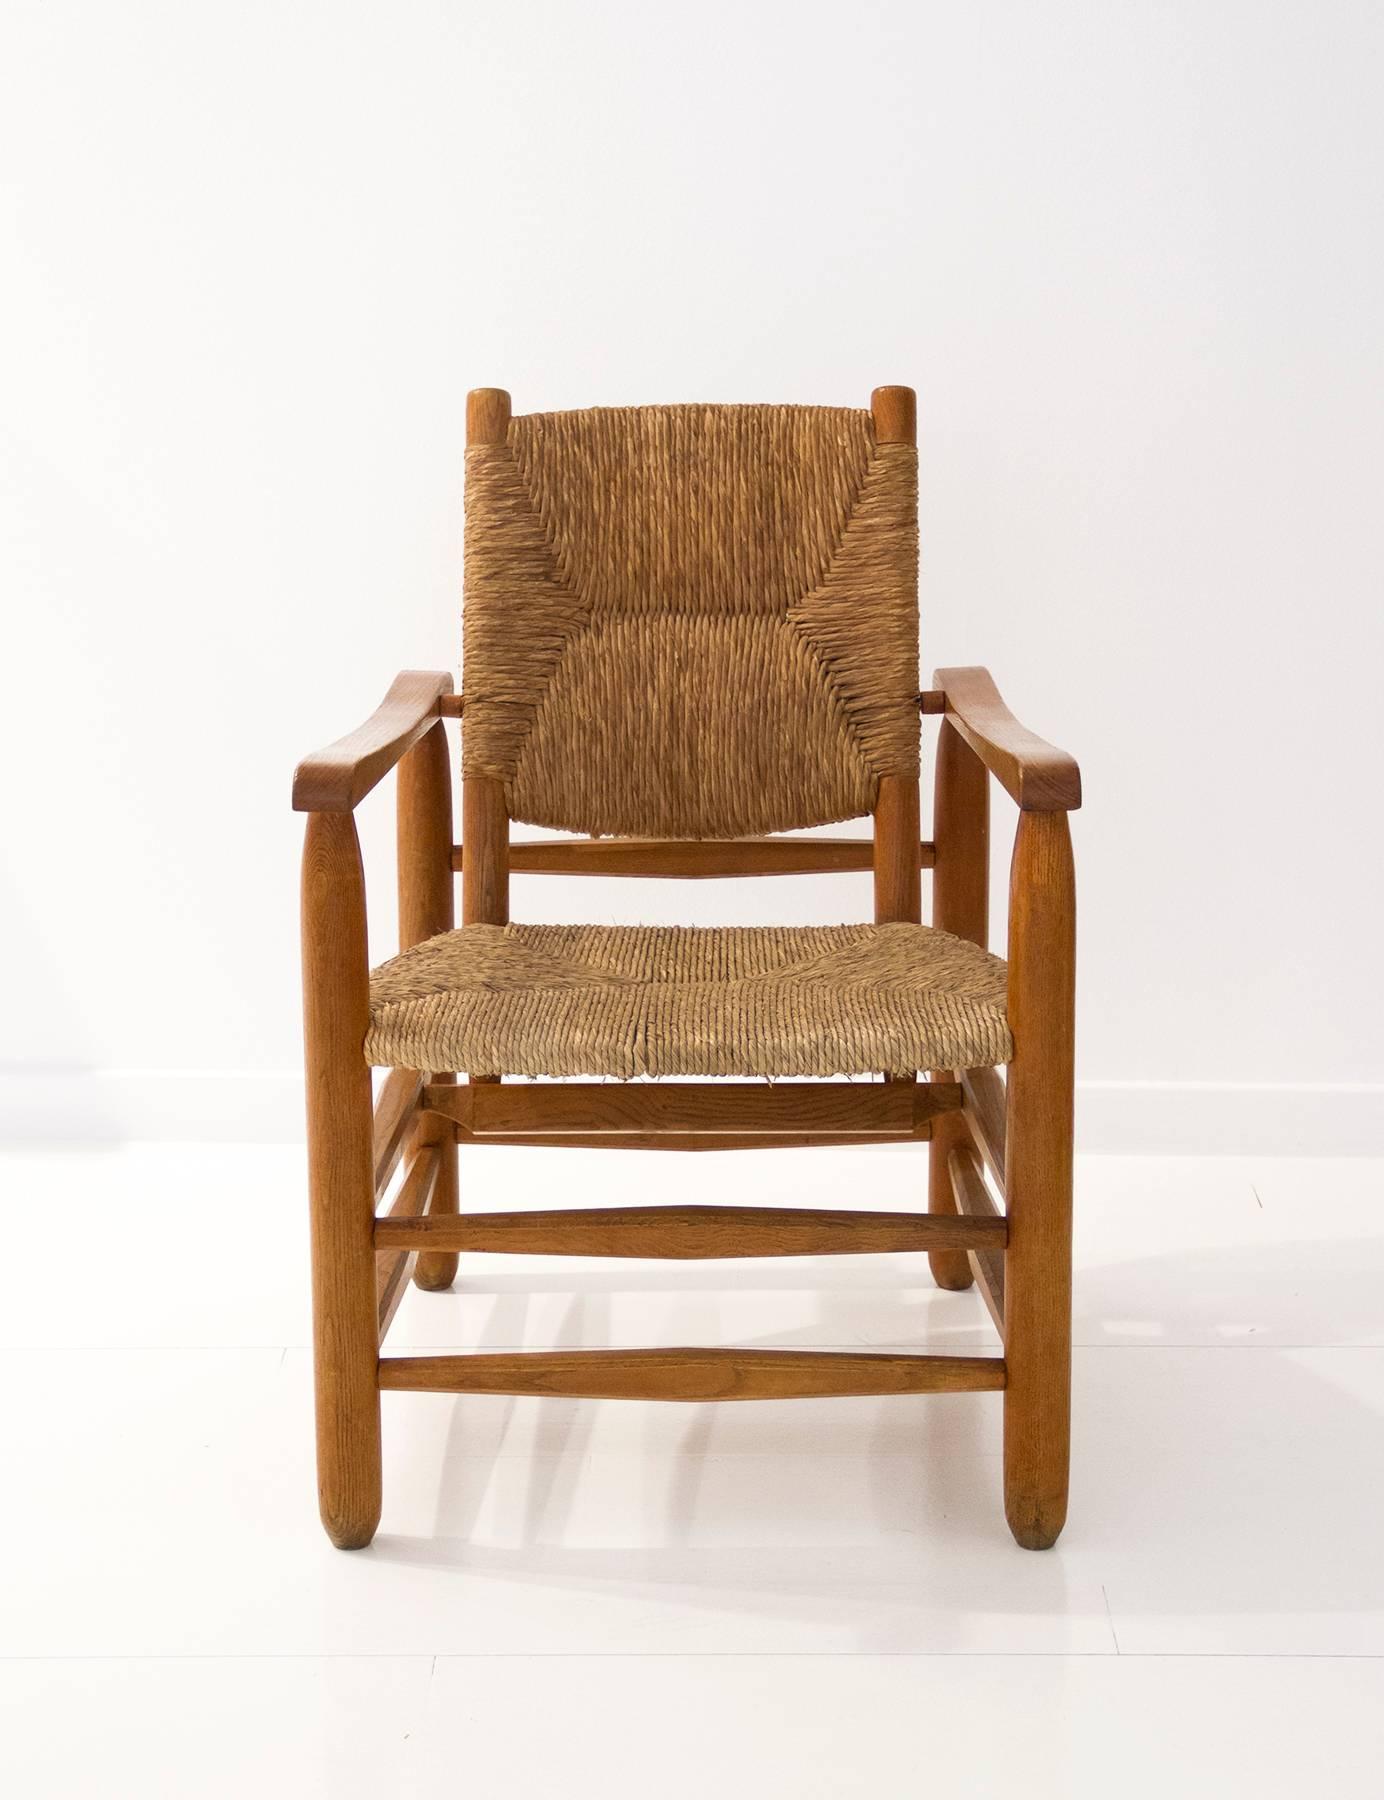 French 'Paille' Armchair by Charlotte Perriand, Solid Wood and Straw, 1935, France